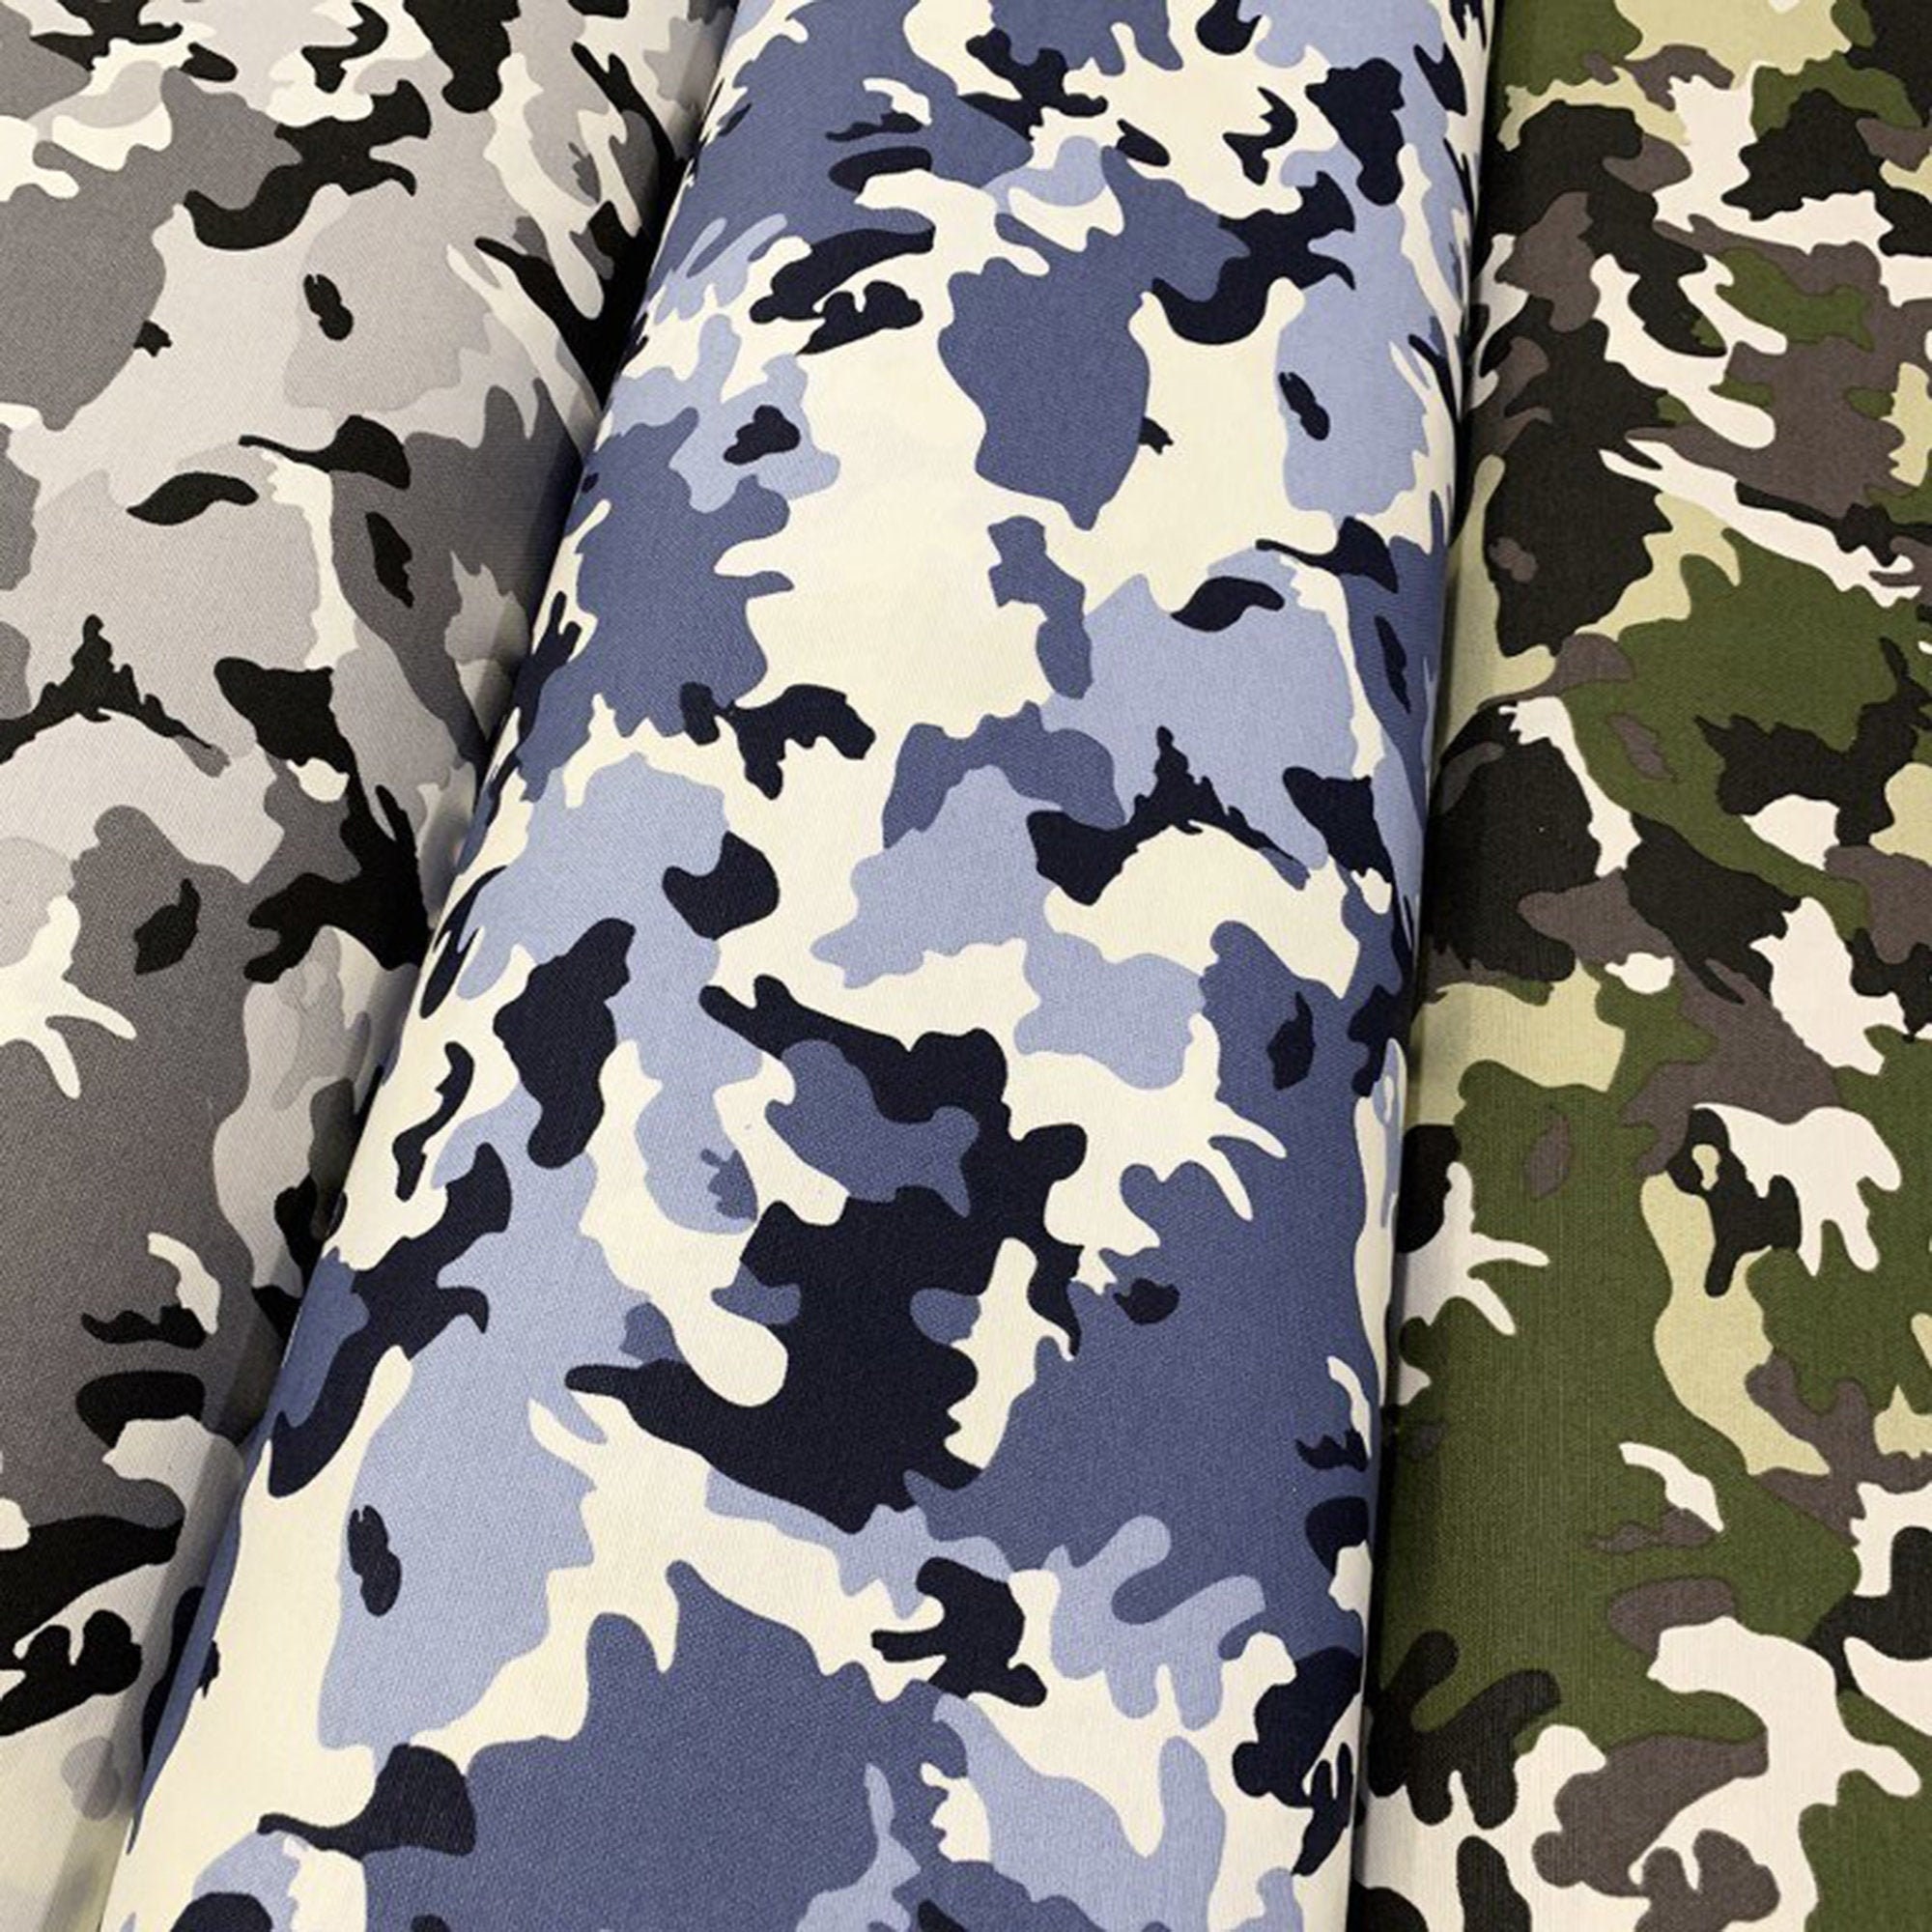 Camo Canvas Fabrics Water Repellent Outdoor Military - Etsy